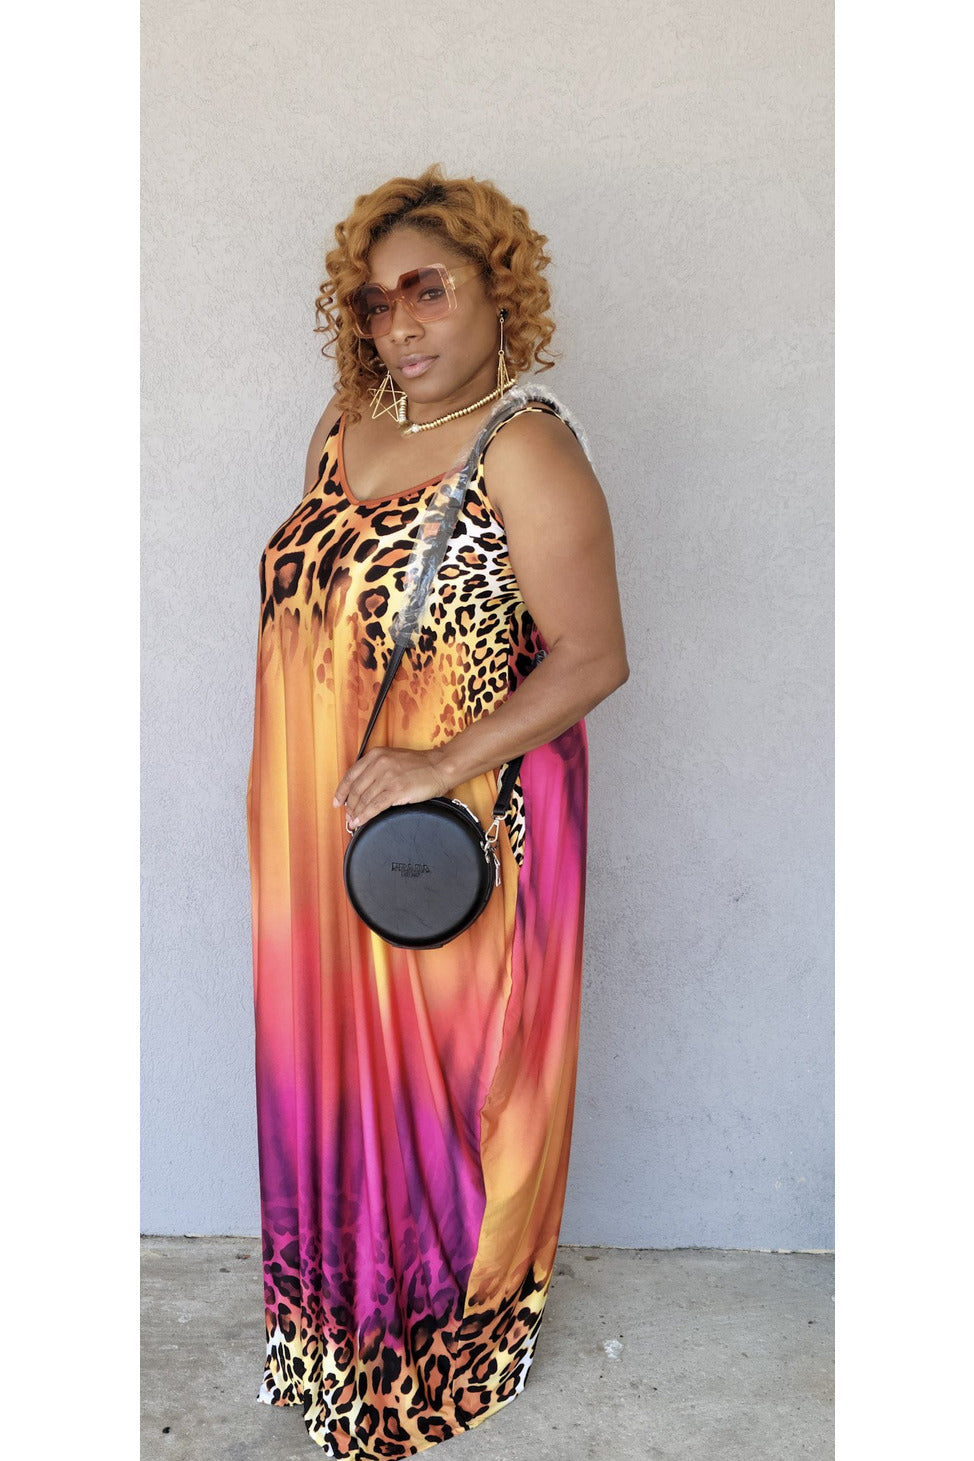 Cheater Curvy Dress for Ladies - Leopard Printed Maxi - 227 Boutique